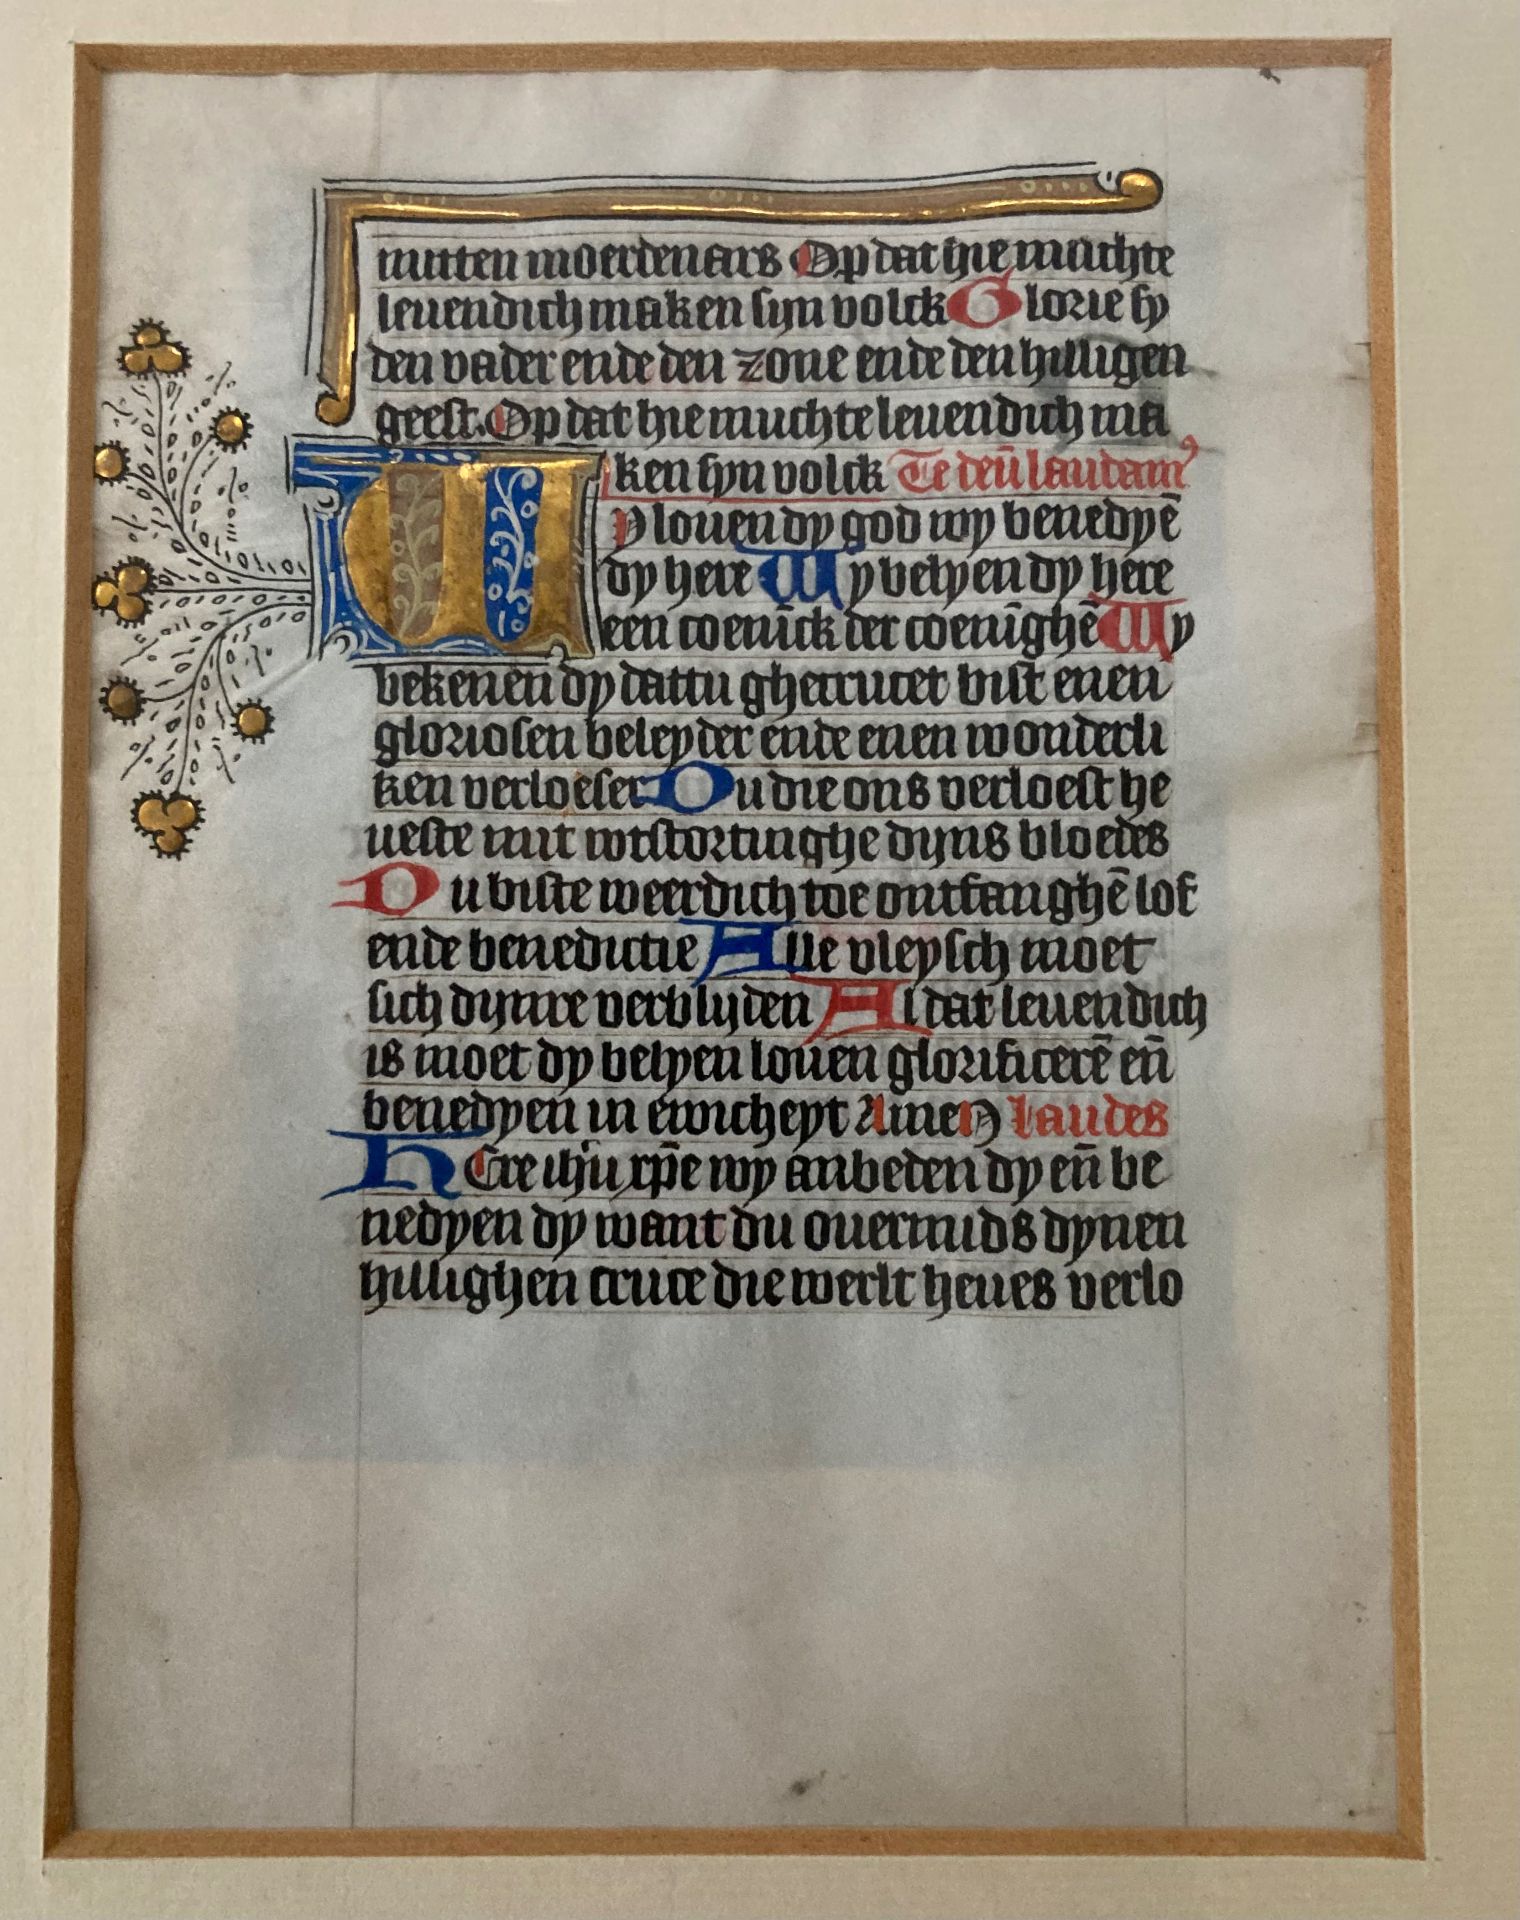 BOOK OF HOURS. 1 leaf from a Dutch book of hours. 14th